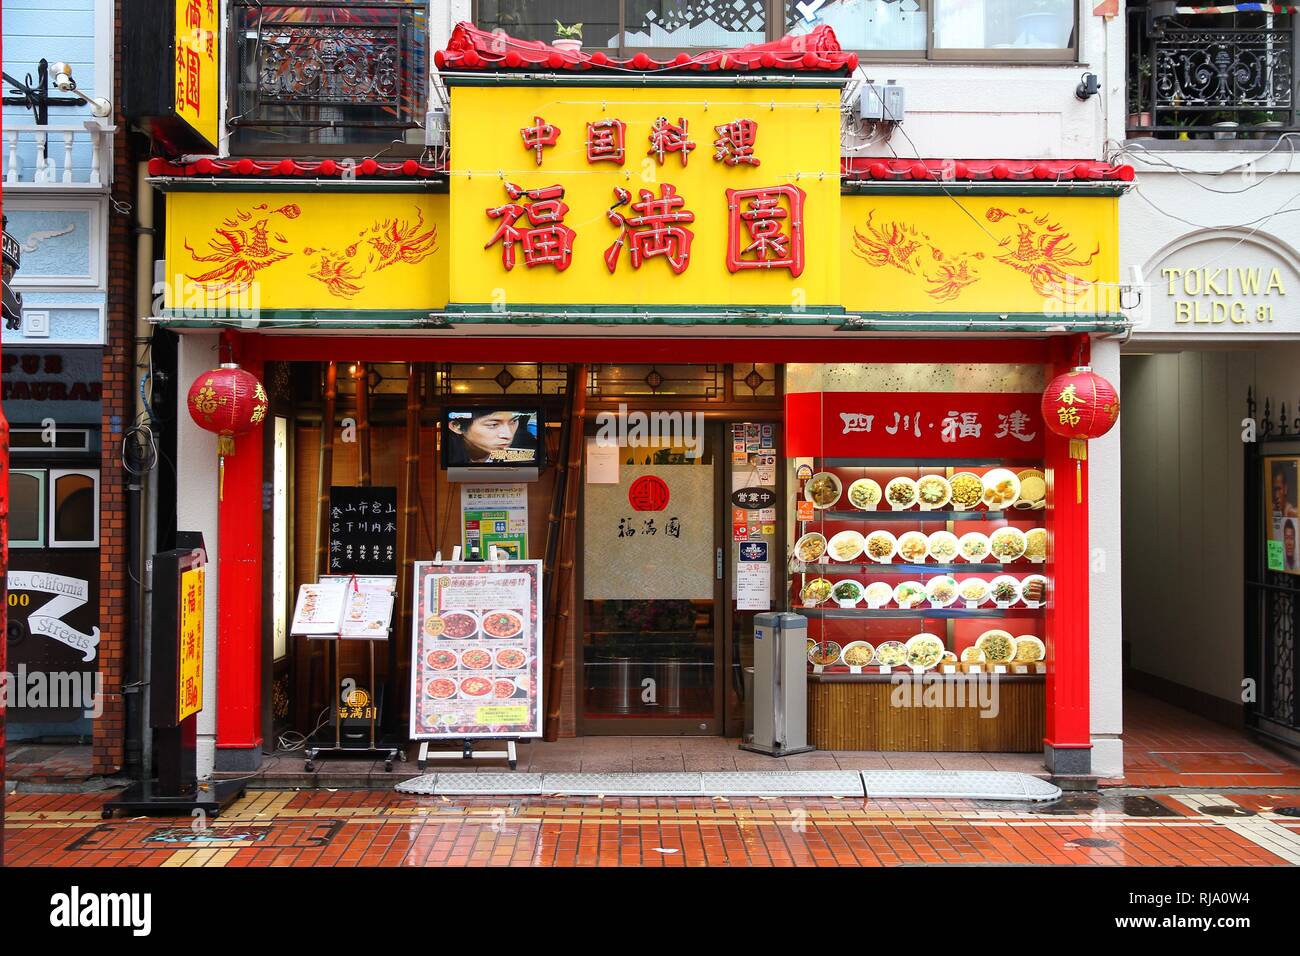 YOKOHAMA, JAPAN - MAY 10: Chinese restaurant in Chinatown on May 10, 2012 in Yokohama, Japan. Yokohama's Chinatown is the largest in Japan and a popul Stock Photo